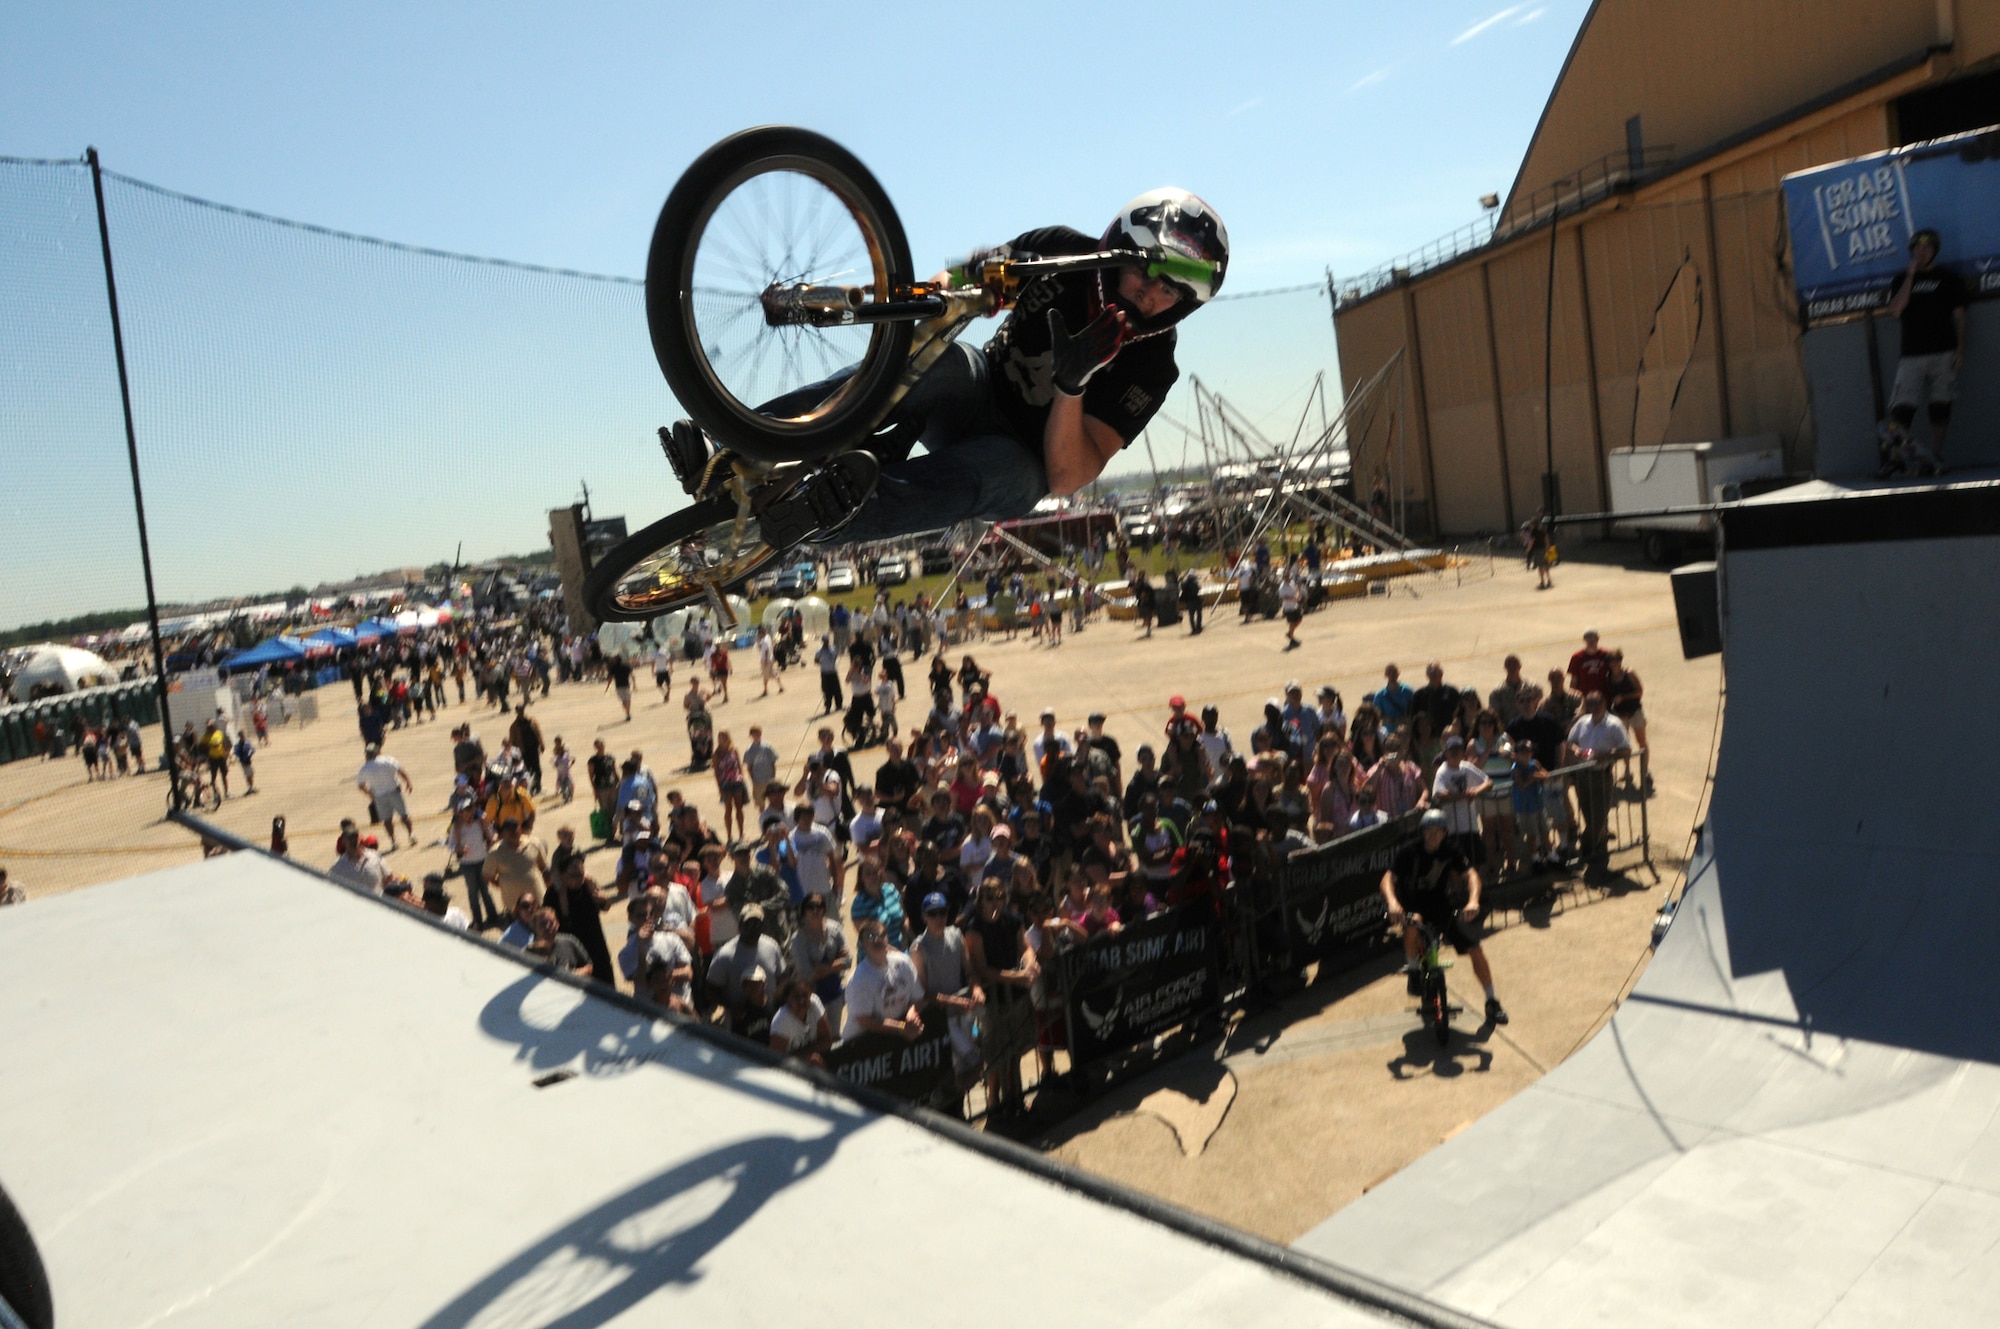 JOINT BASE ANDREWS, Md.-- Koji Kraft, a team BMX rider for ASA Entertainment, clears the edge of the ramp at the Joint Service Open House here May 15. Mr. Kraft joins other extreme athletes in supporting the Air Force Reserve recruiting campaign, "Grab Some Air," which aims at attracting an active demographic of 17-34 years old to the Reserve. The JSOH allows members of the public an excellent opportunity to meet and interact with the men and women of the Armed Forces and to show them America’s skilled military. (U.S. Air Force photo by Staff Sgt. Steve Lewis)